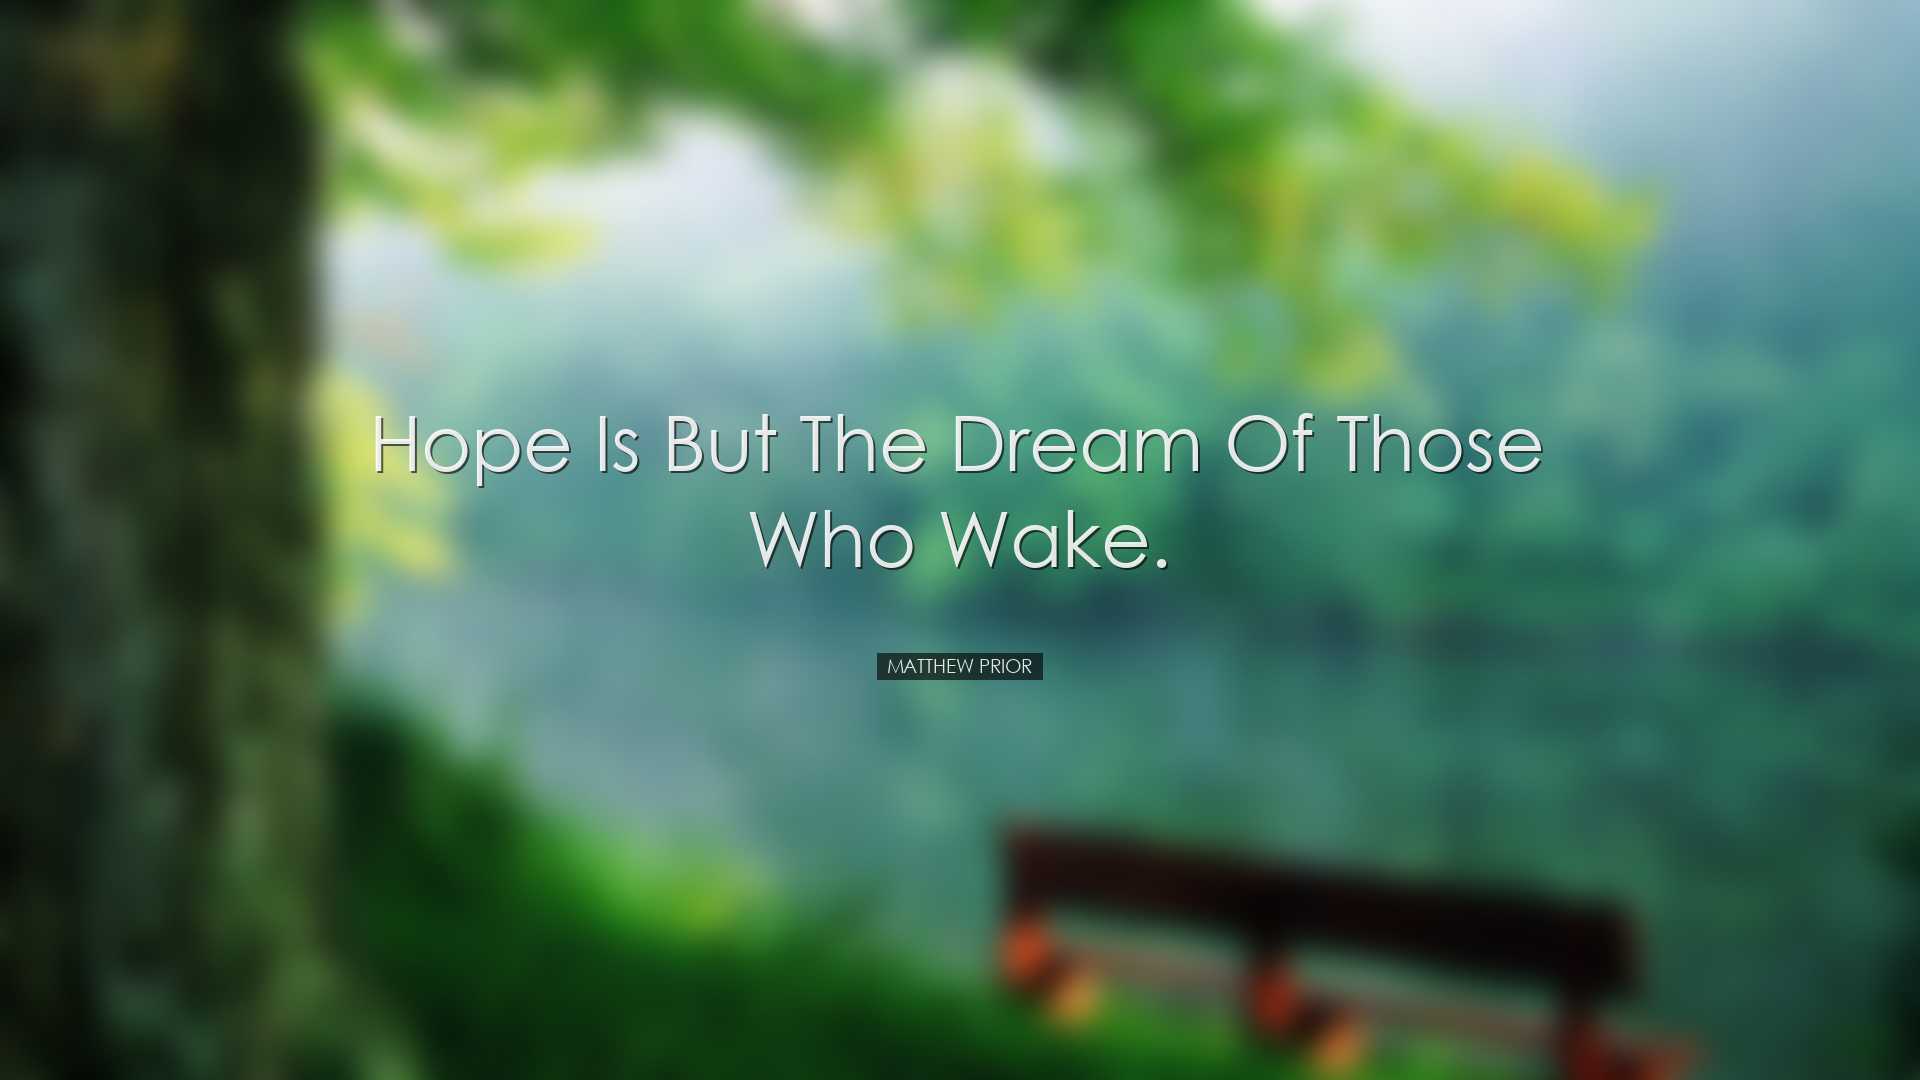 Hope is but the dream of those who wake. - Matthew Prior